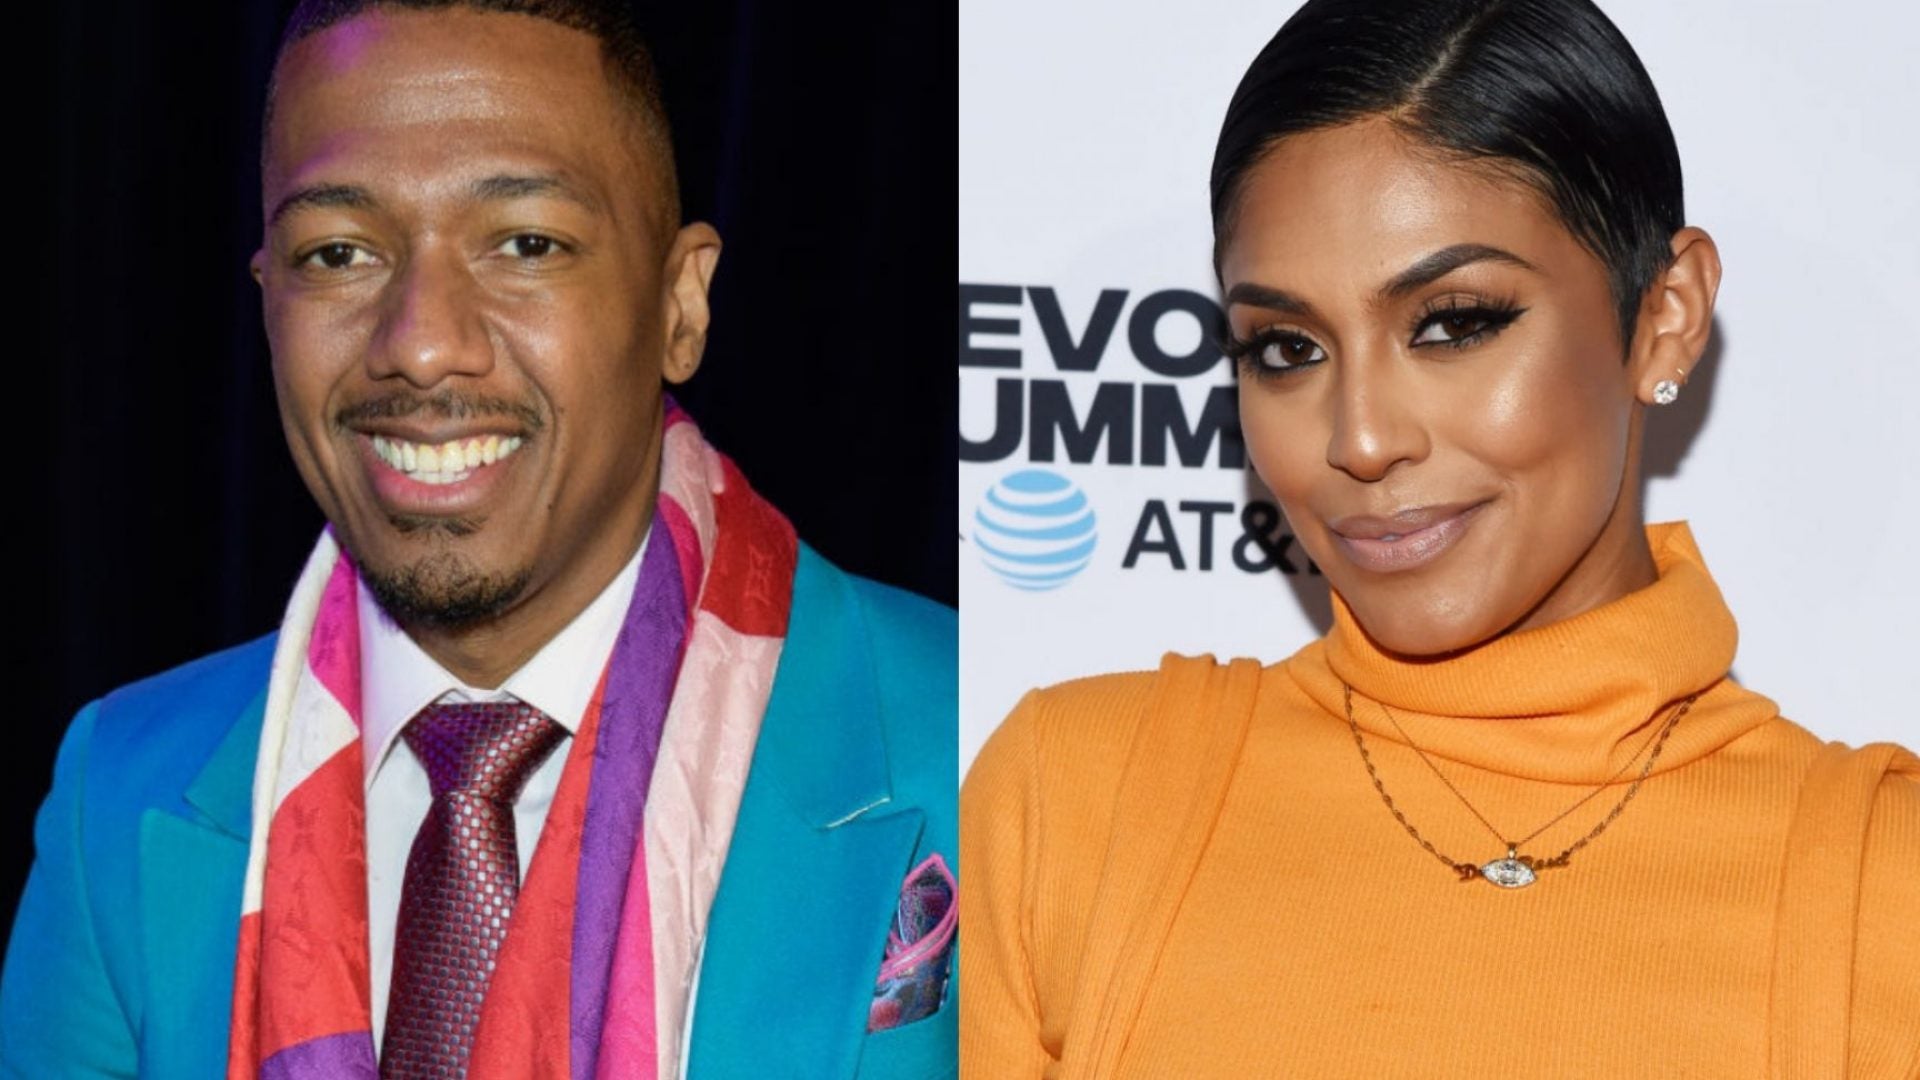 Nick Cannon And Abby De La Rosa Celebrate Their Twins At Baby Shower